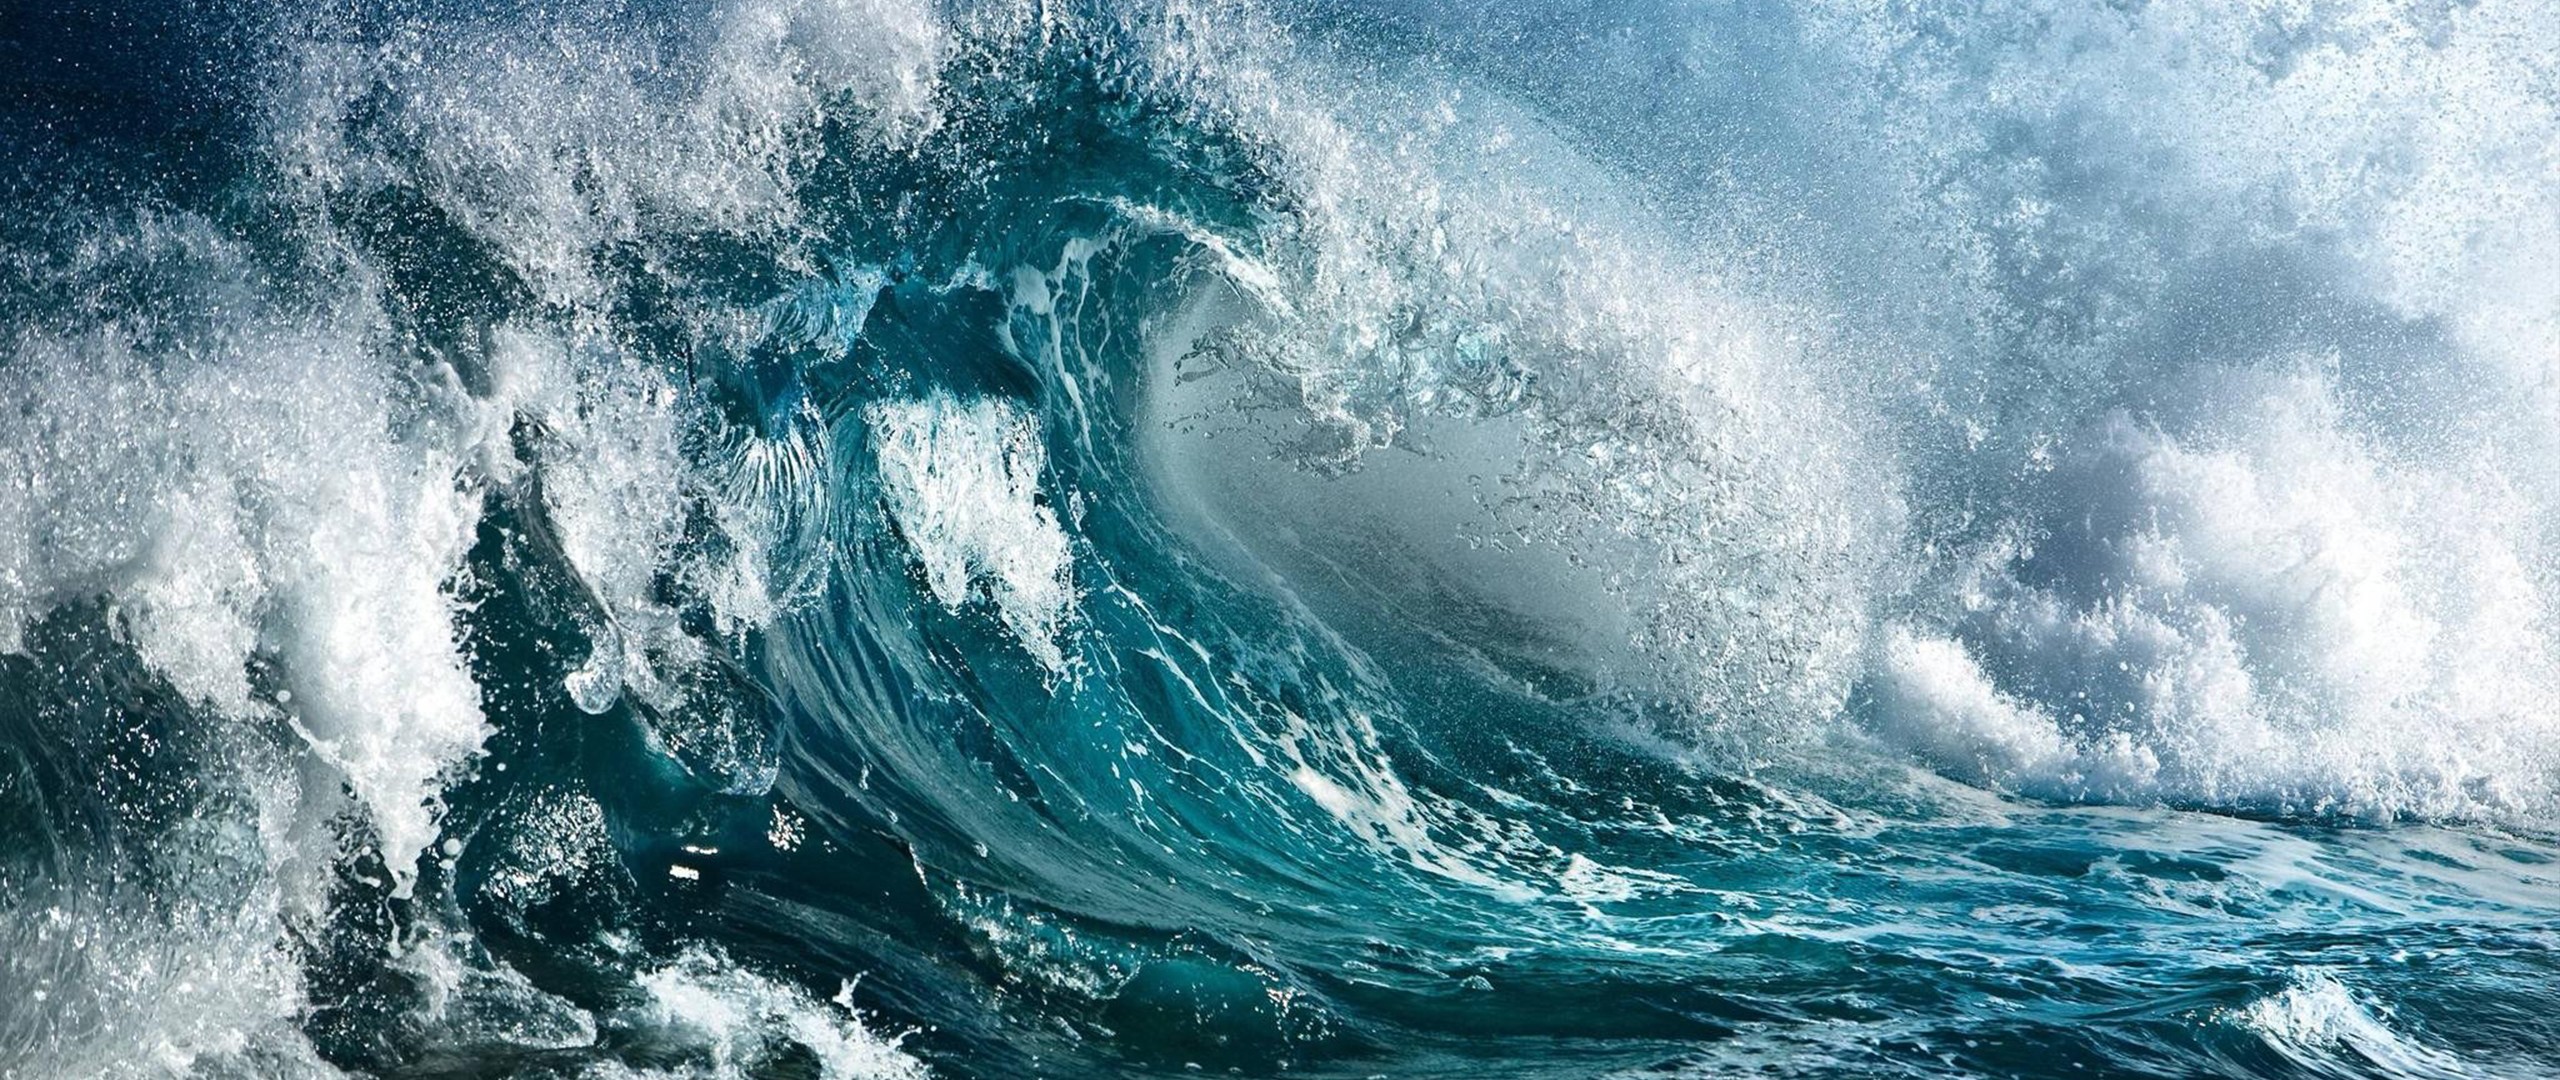 General 2560x1080 ultrawide sea water waves splashes turquoise